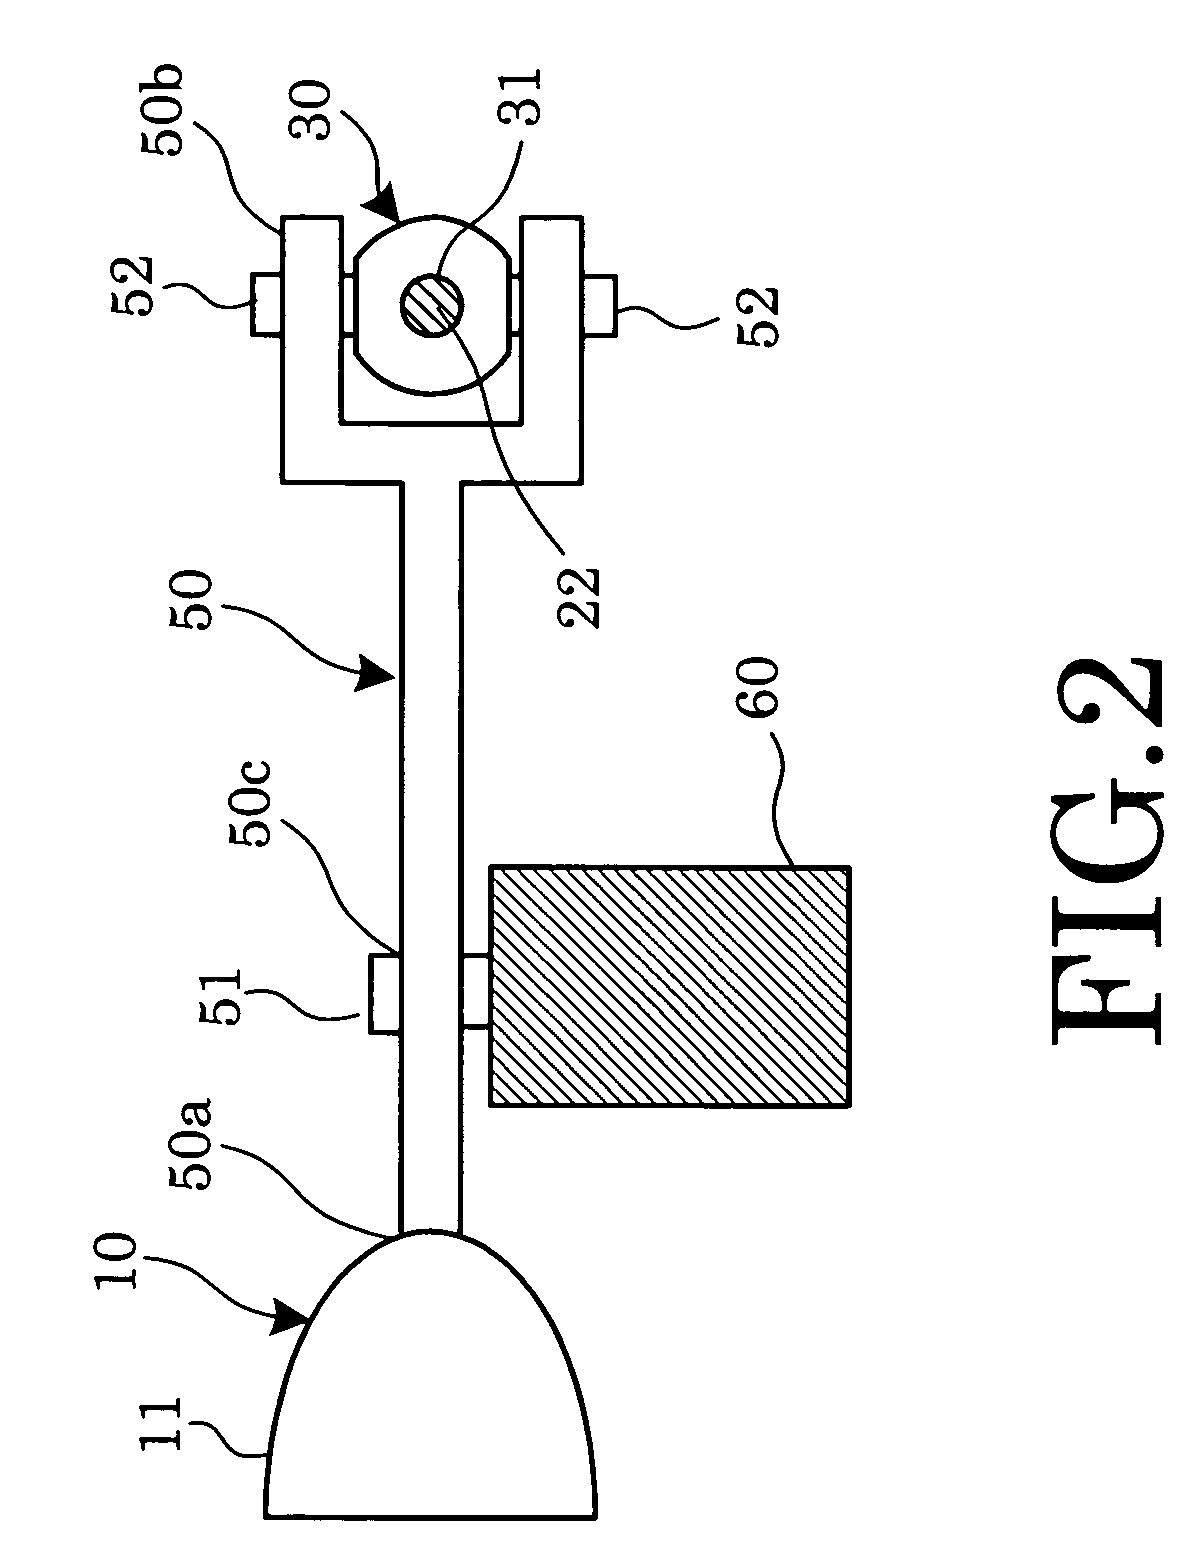 Mechanism for deflecting headlamp optical axis without speed reduction gears